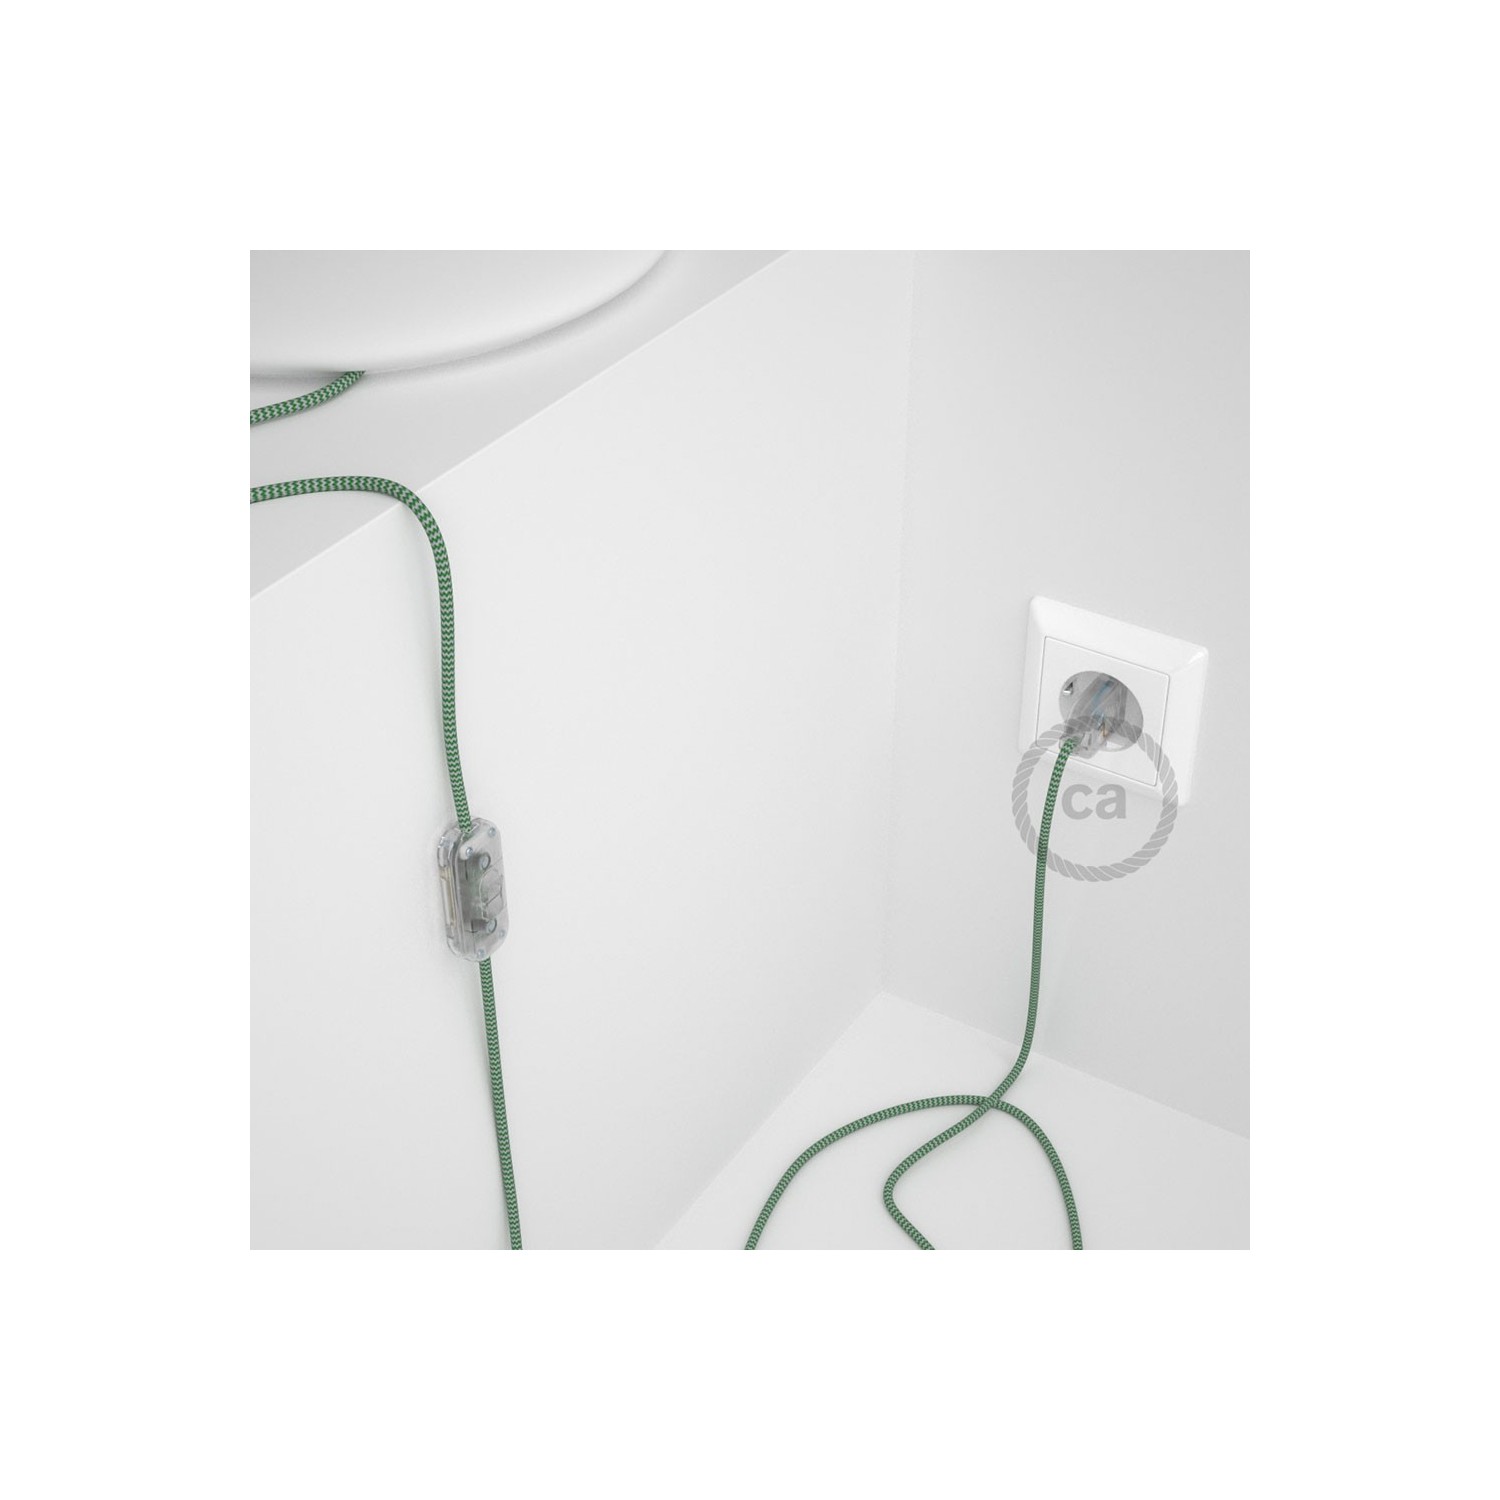 Lamp wiring, RZ06 Green ZigZag Rayon 1,80 m. Choose the colour of the switch and plug.